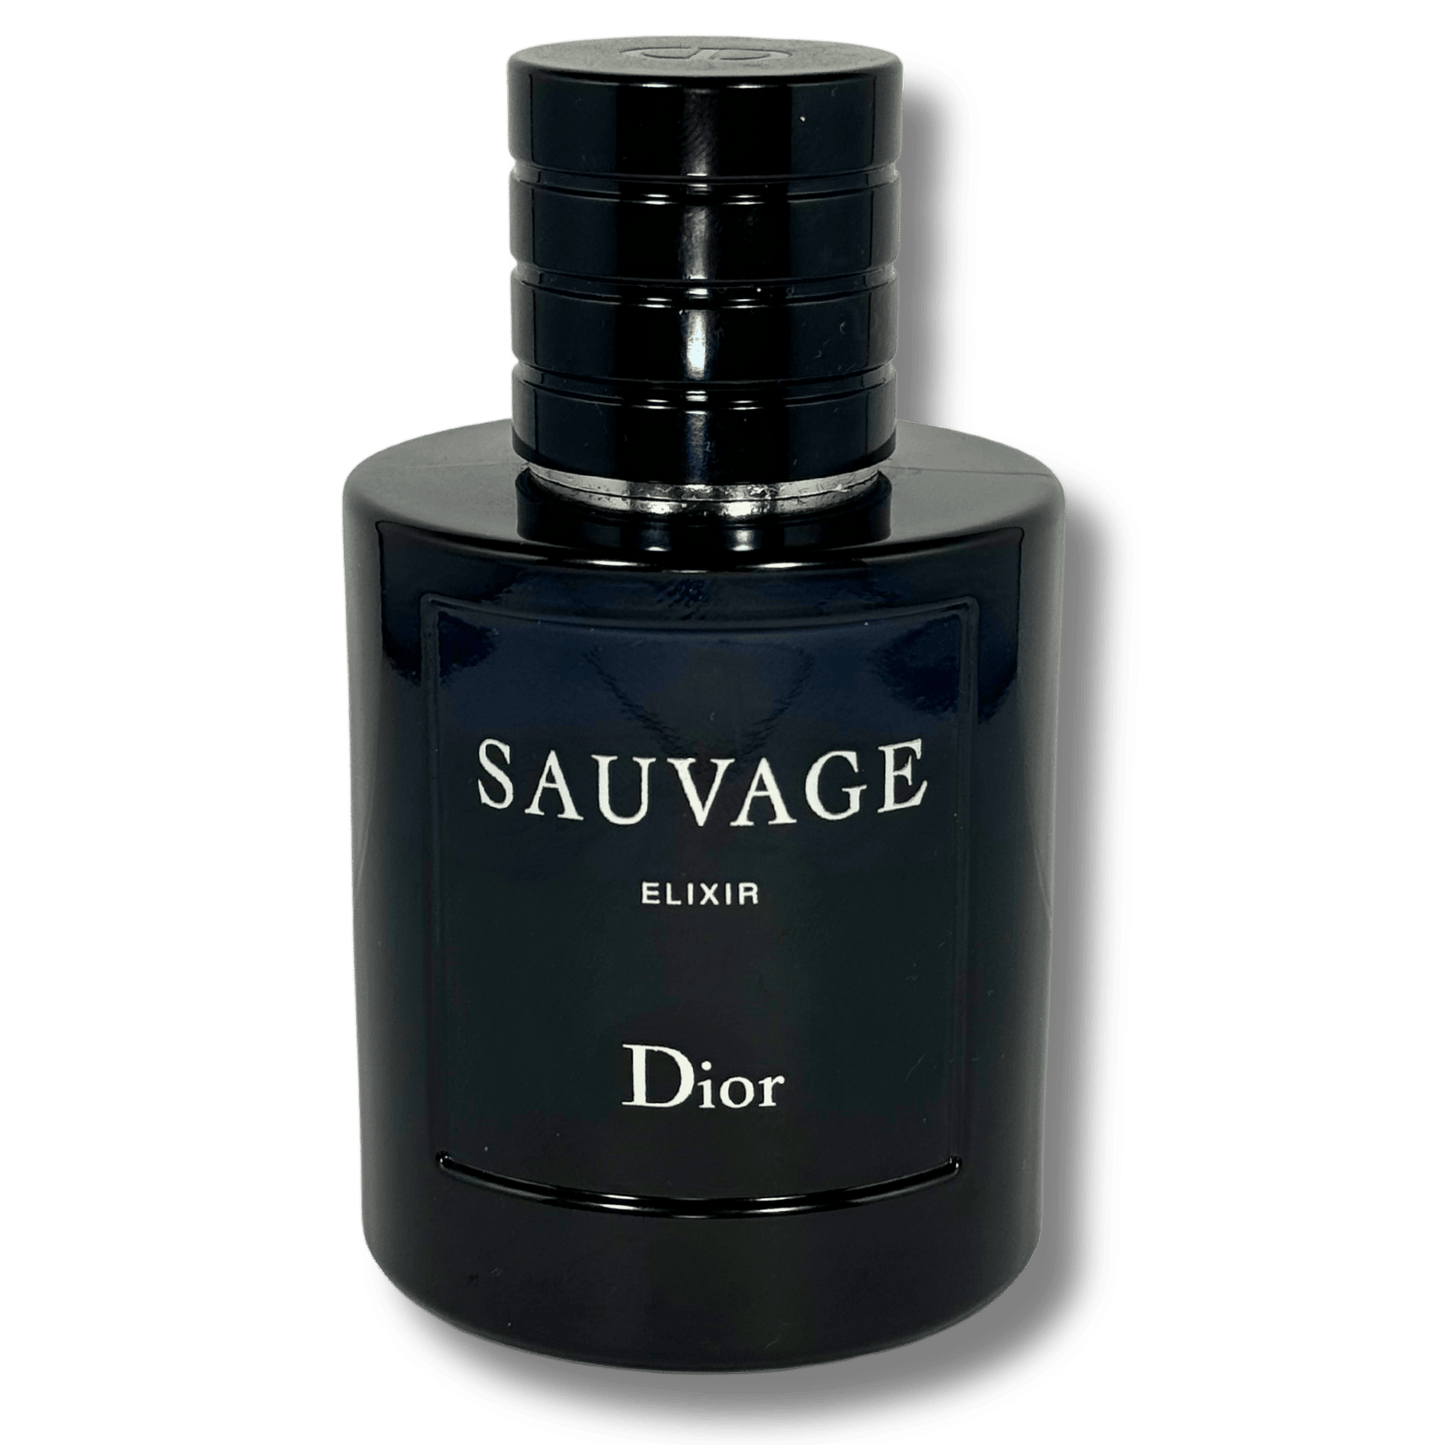 Dior Sauvage Elixir 100ml Sample Picture